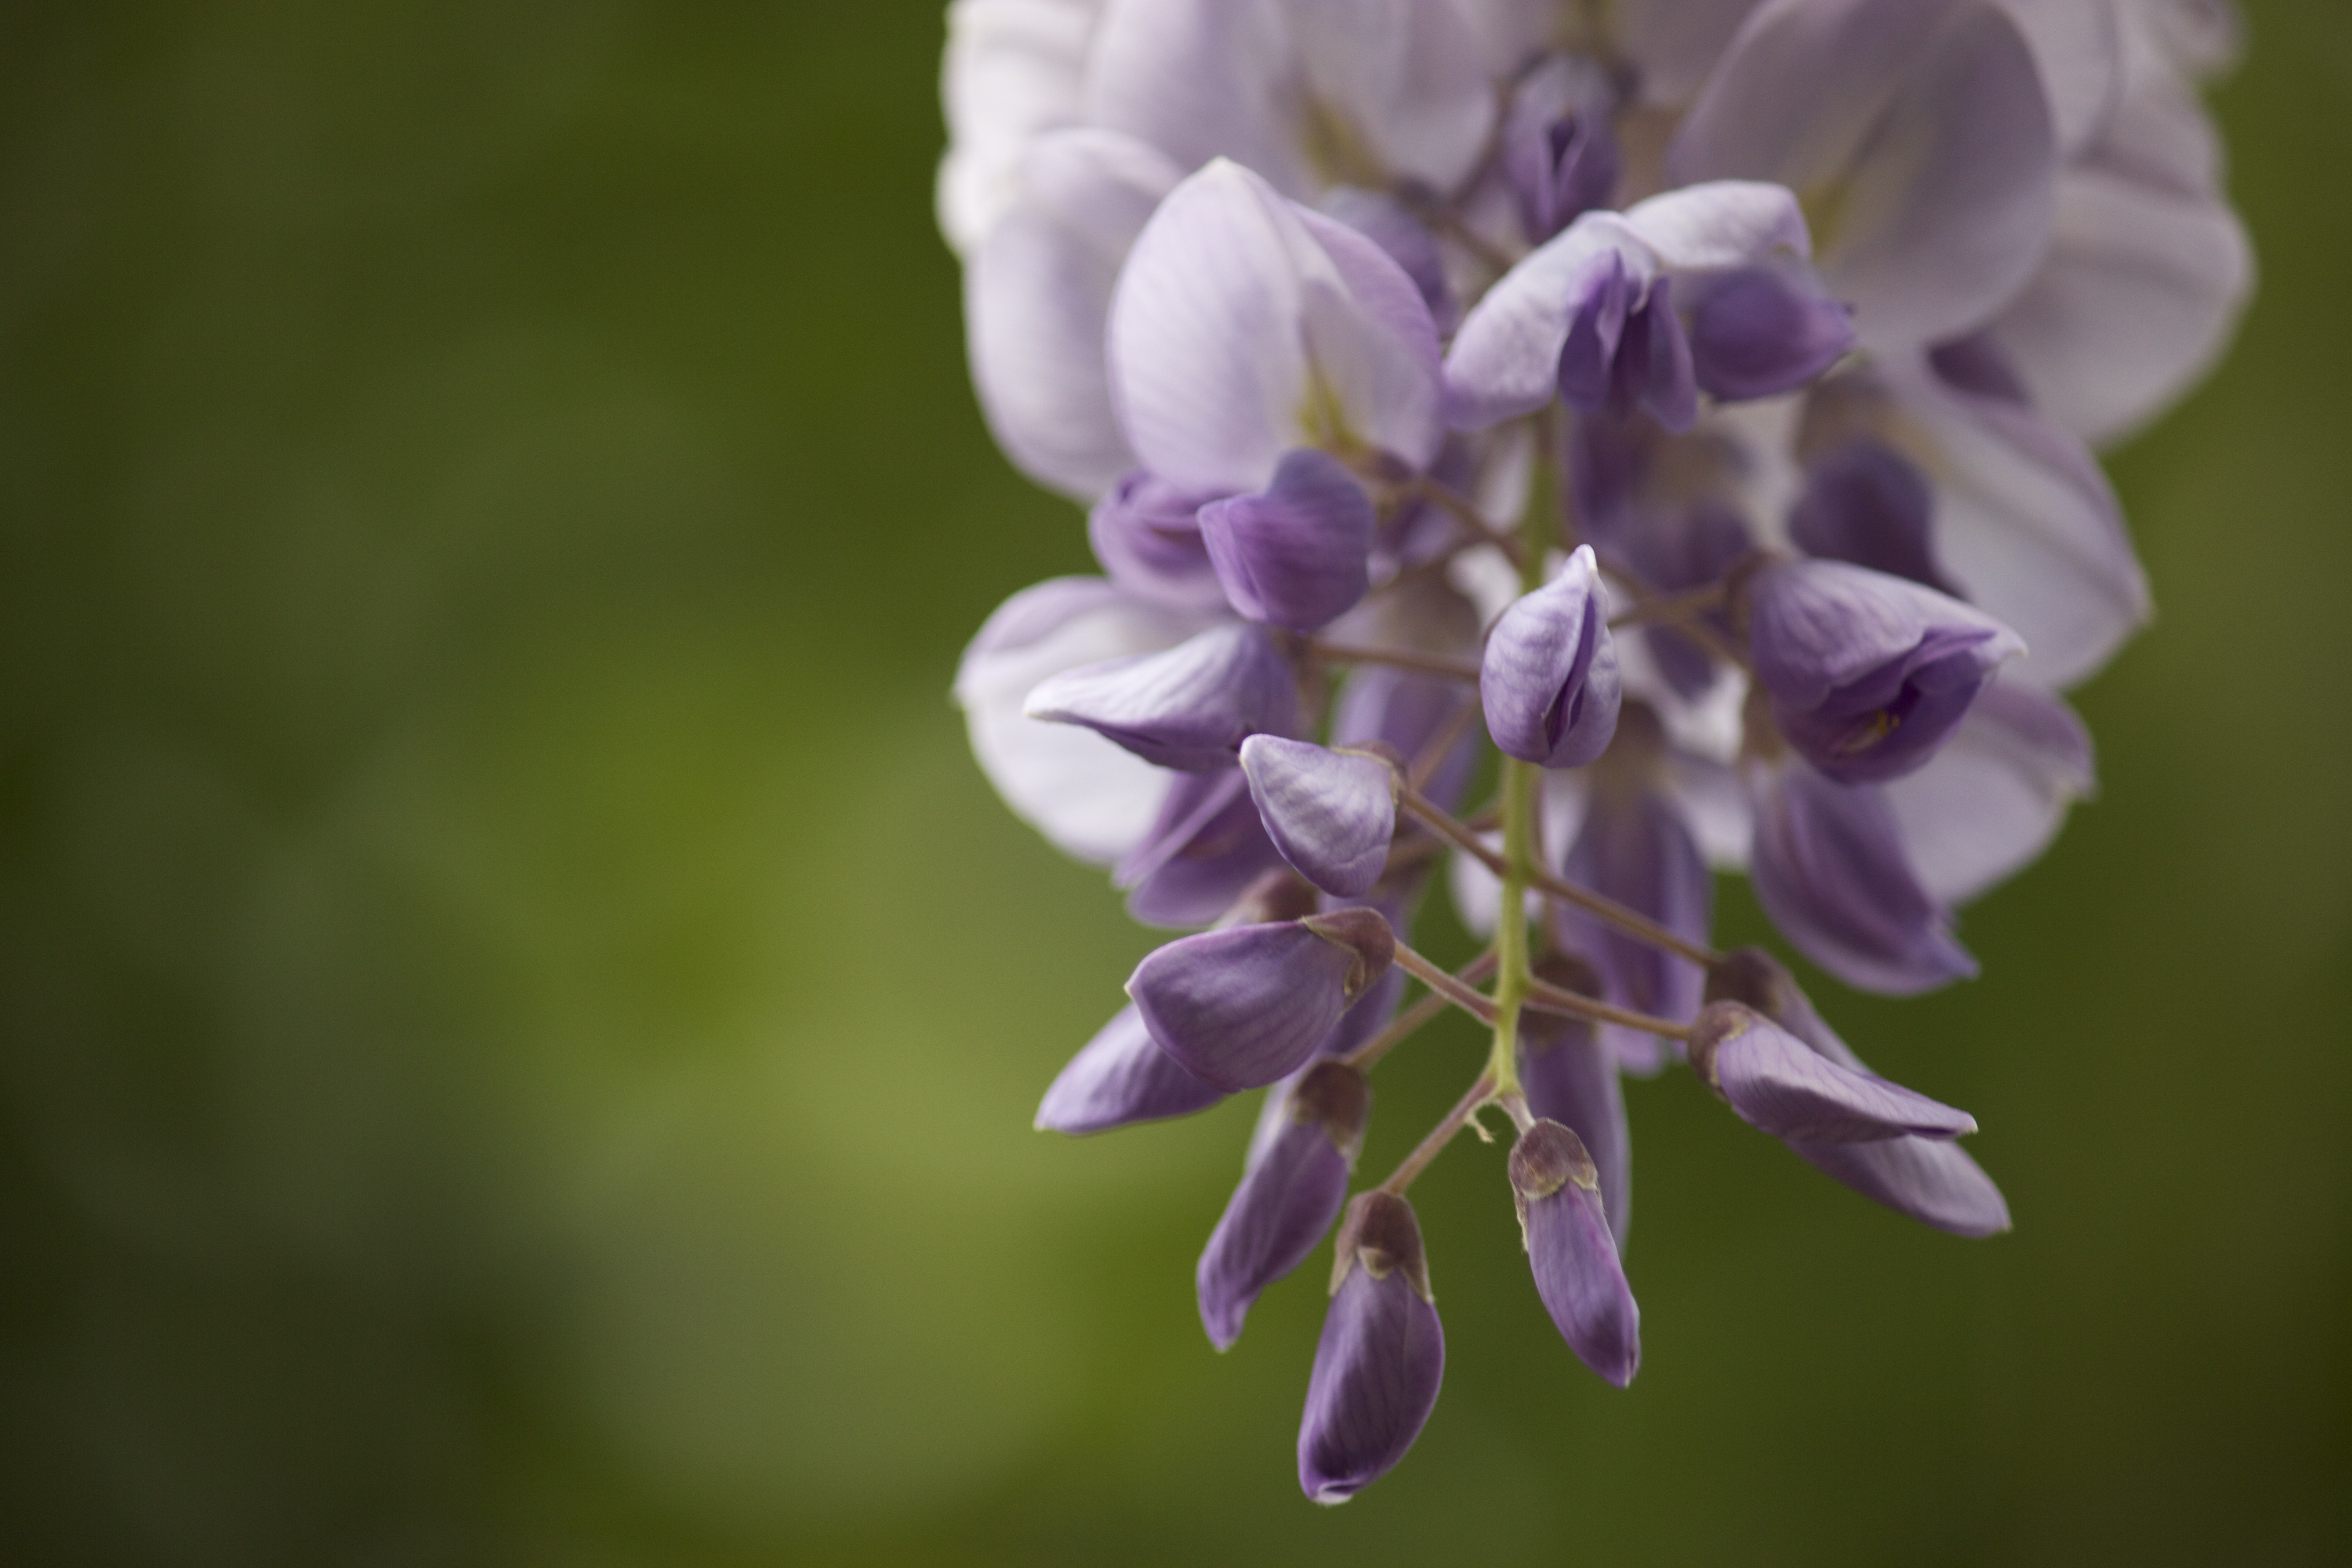 Closeup of purple wisteria flowers against a blurred green background.